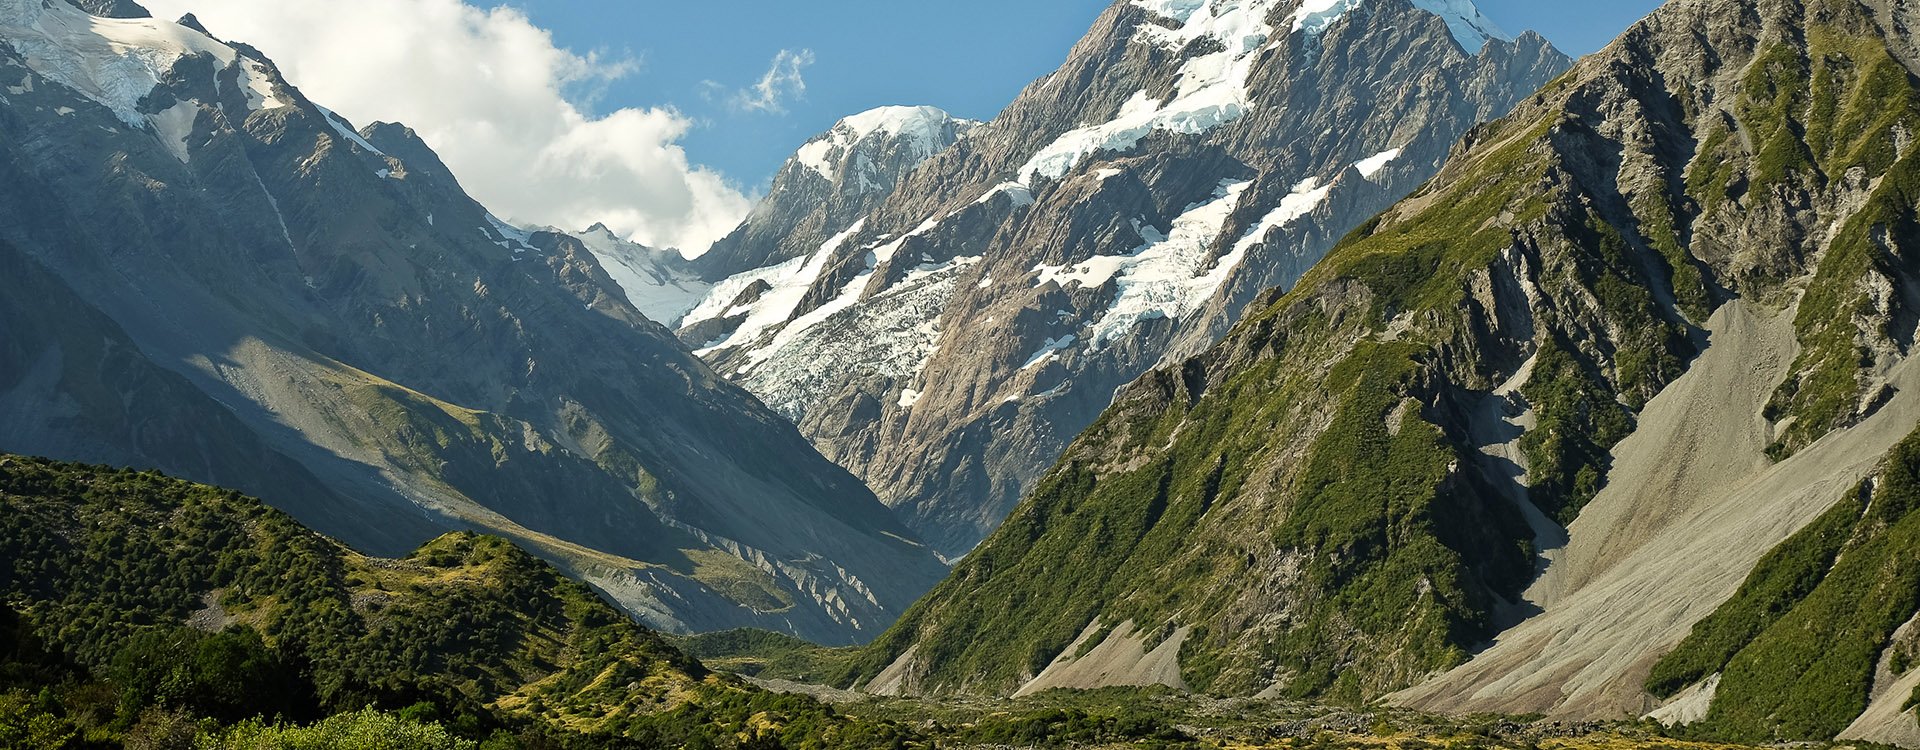 Mt. Cook and Hooker Valley From The Village. Mt. Cook National Park, Southern Alps, New Zealand